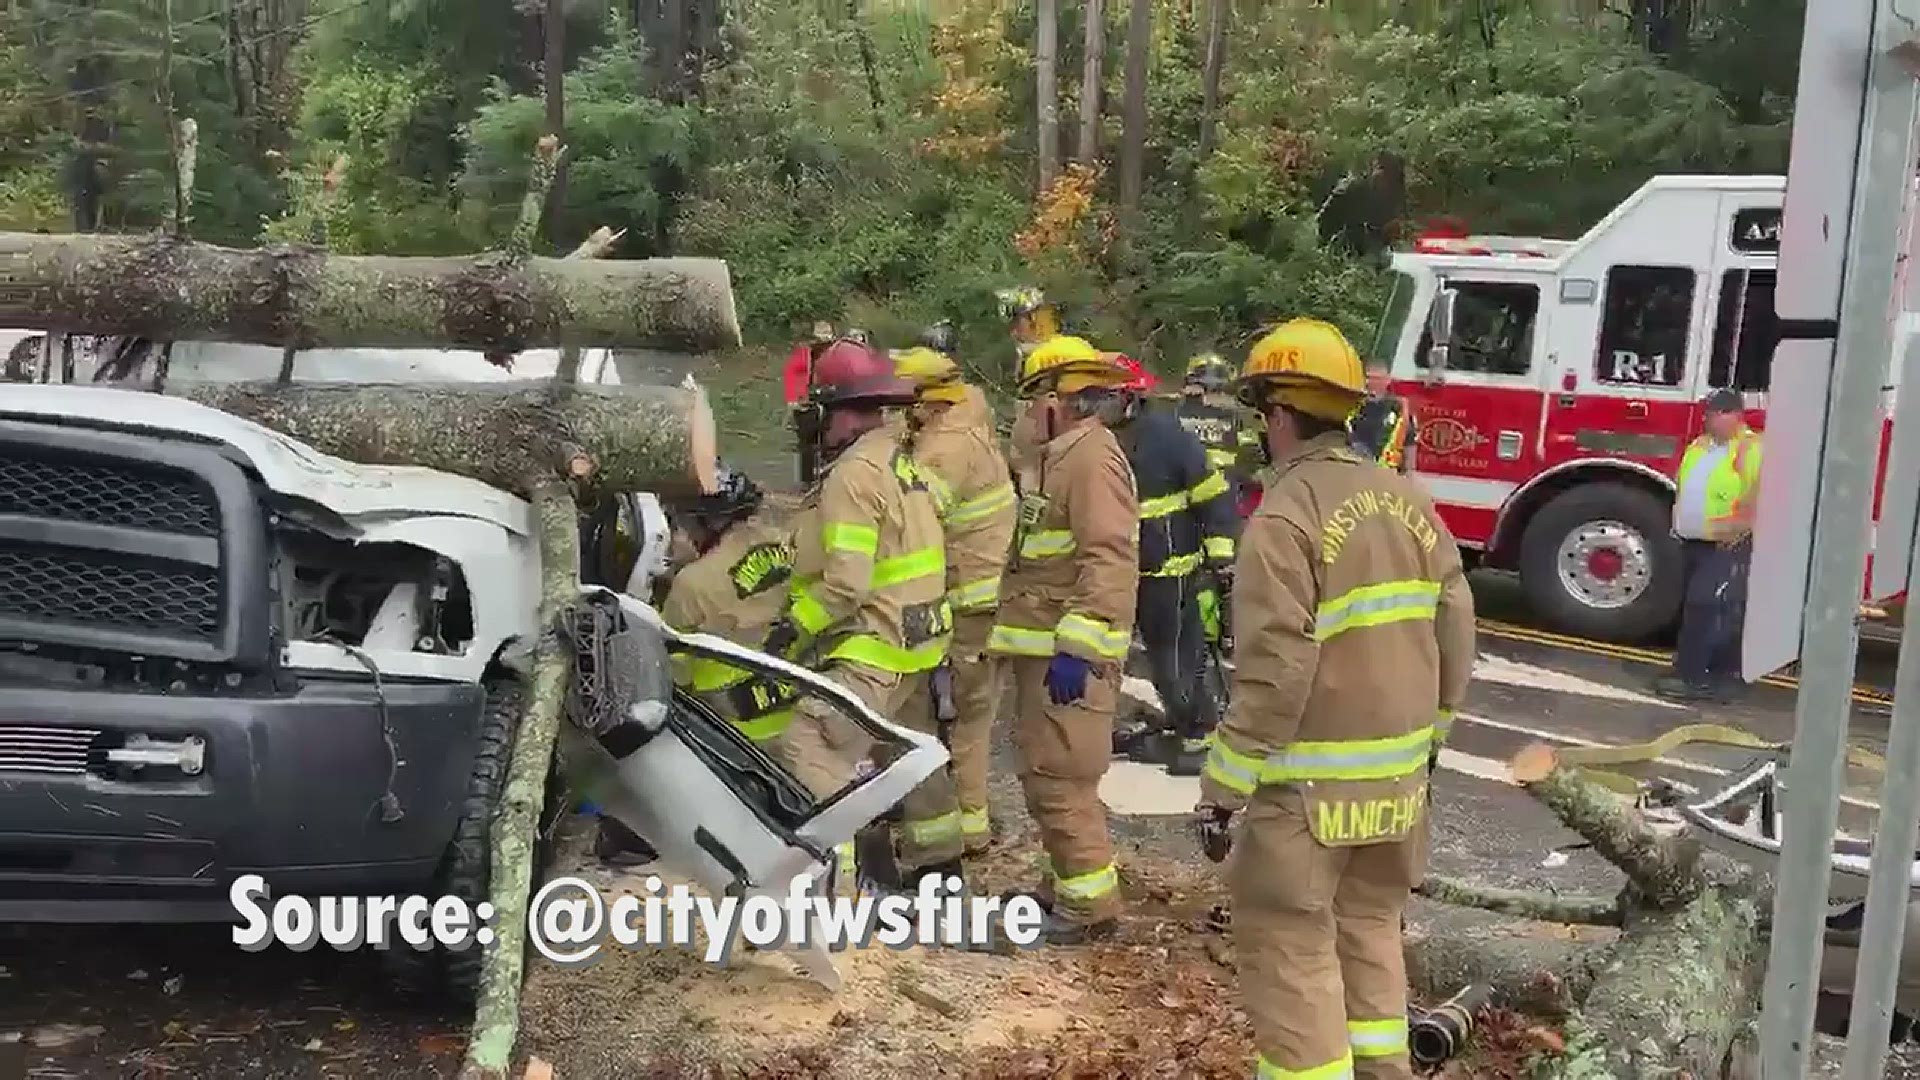 Winston-Salem firefighters got a person out of a truck after strong Zeta winds knocked a tree on top of the vehicle.